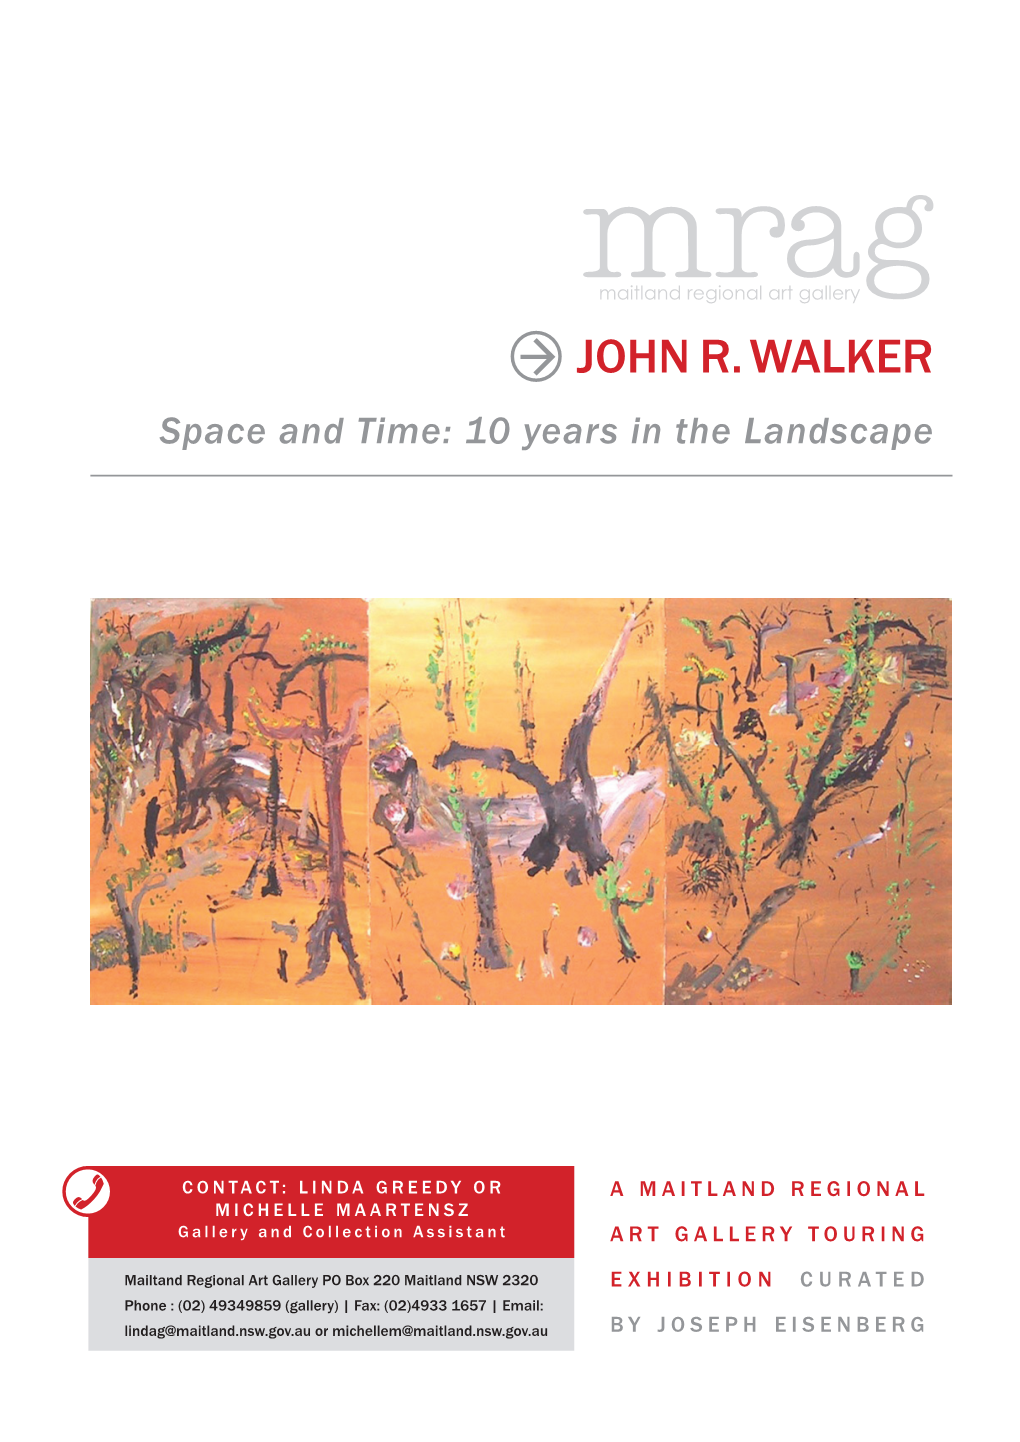 JOHN R. WALKER Space and Time: 10 Years in the Landscape